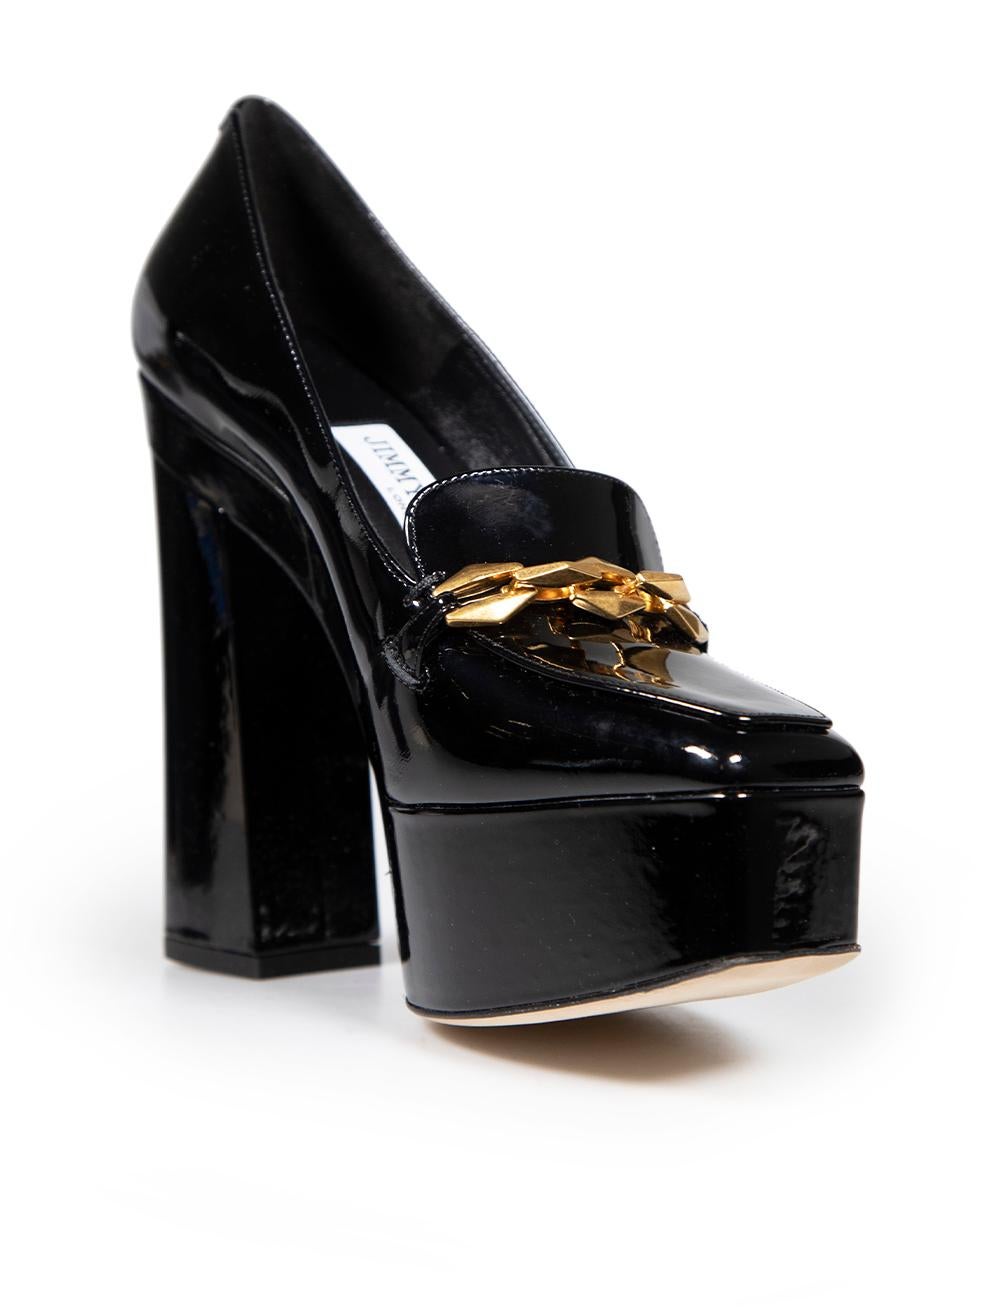 CONDITION is Never worn, with tags. No visible wear to shoes is evident on this new Jimmy Choo designer resale item. These shoes come with original box and dust bags.
 
 Details
 Model: Tilda 140
 Black
 Patent leather
 Heels
 Gold chain detail
